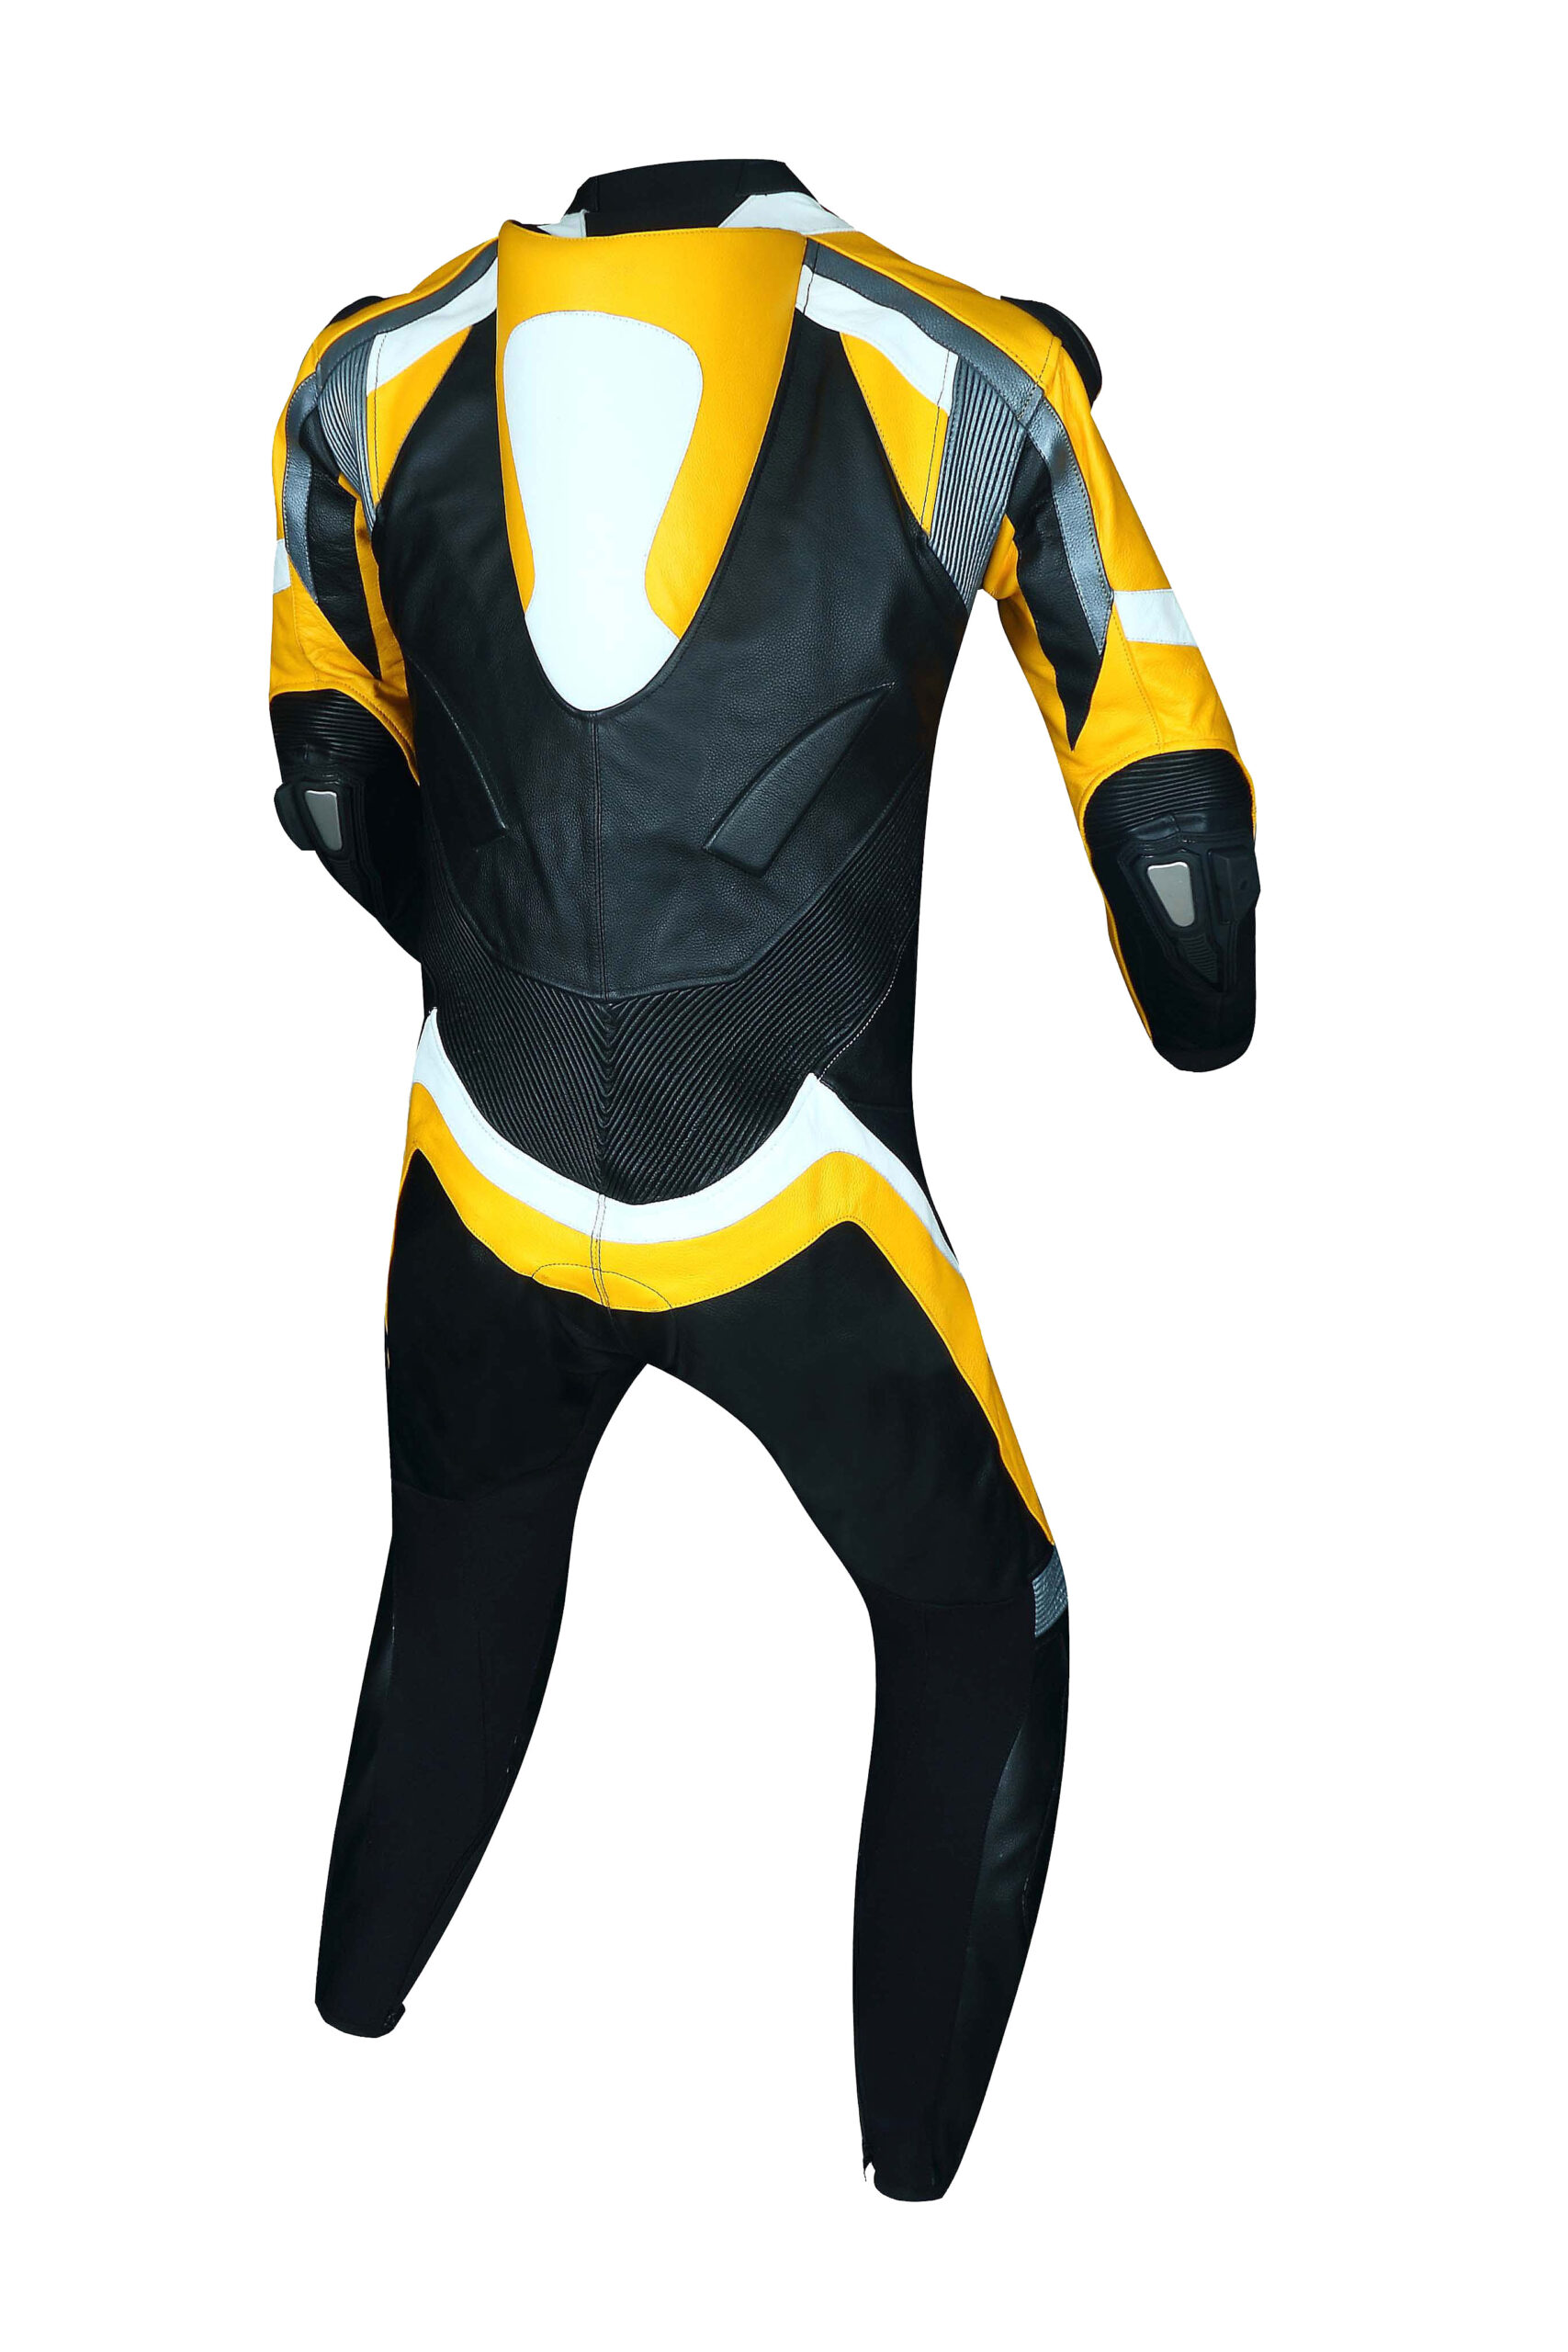 LS-4-Yellow-Motorbike-Suits-Back